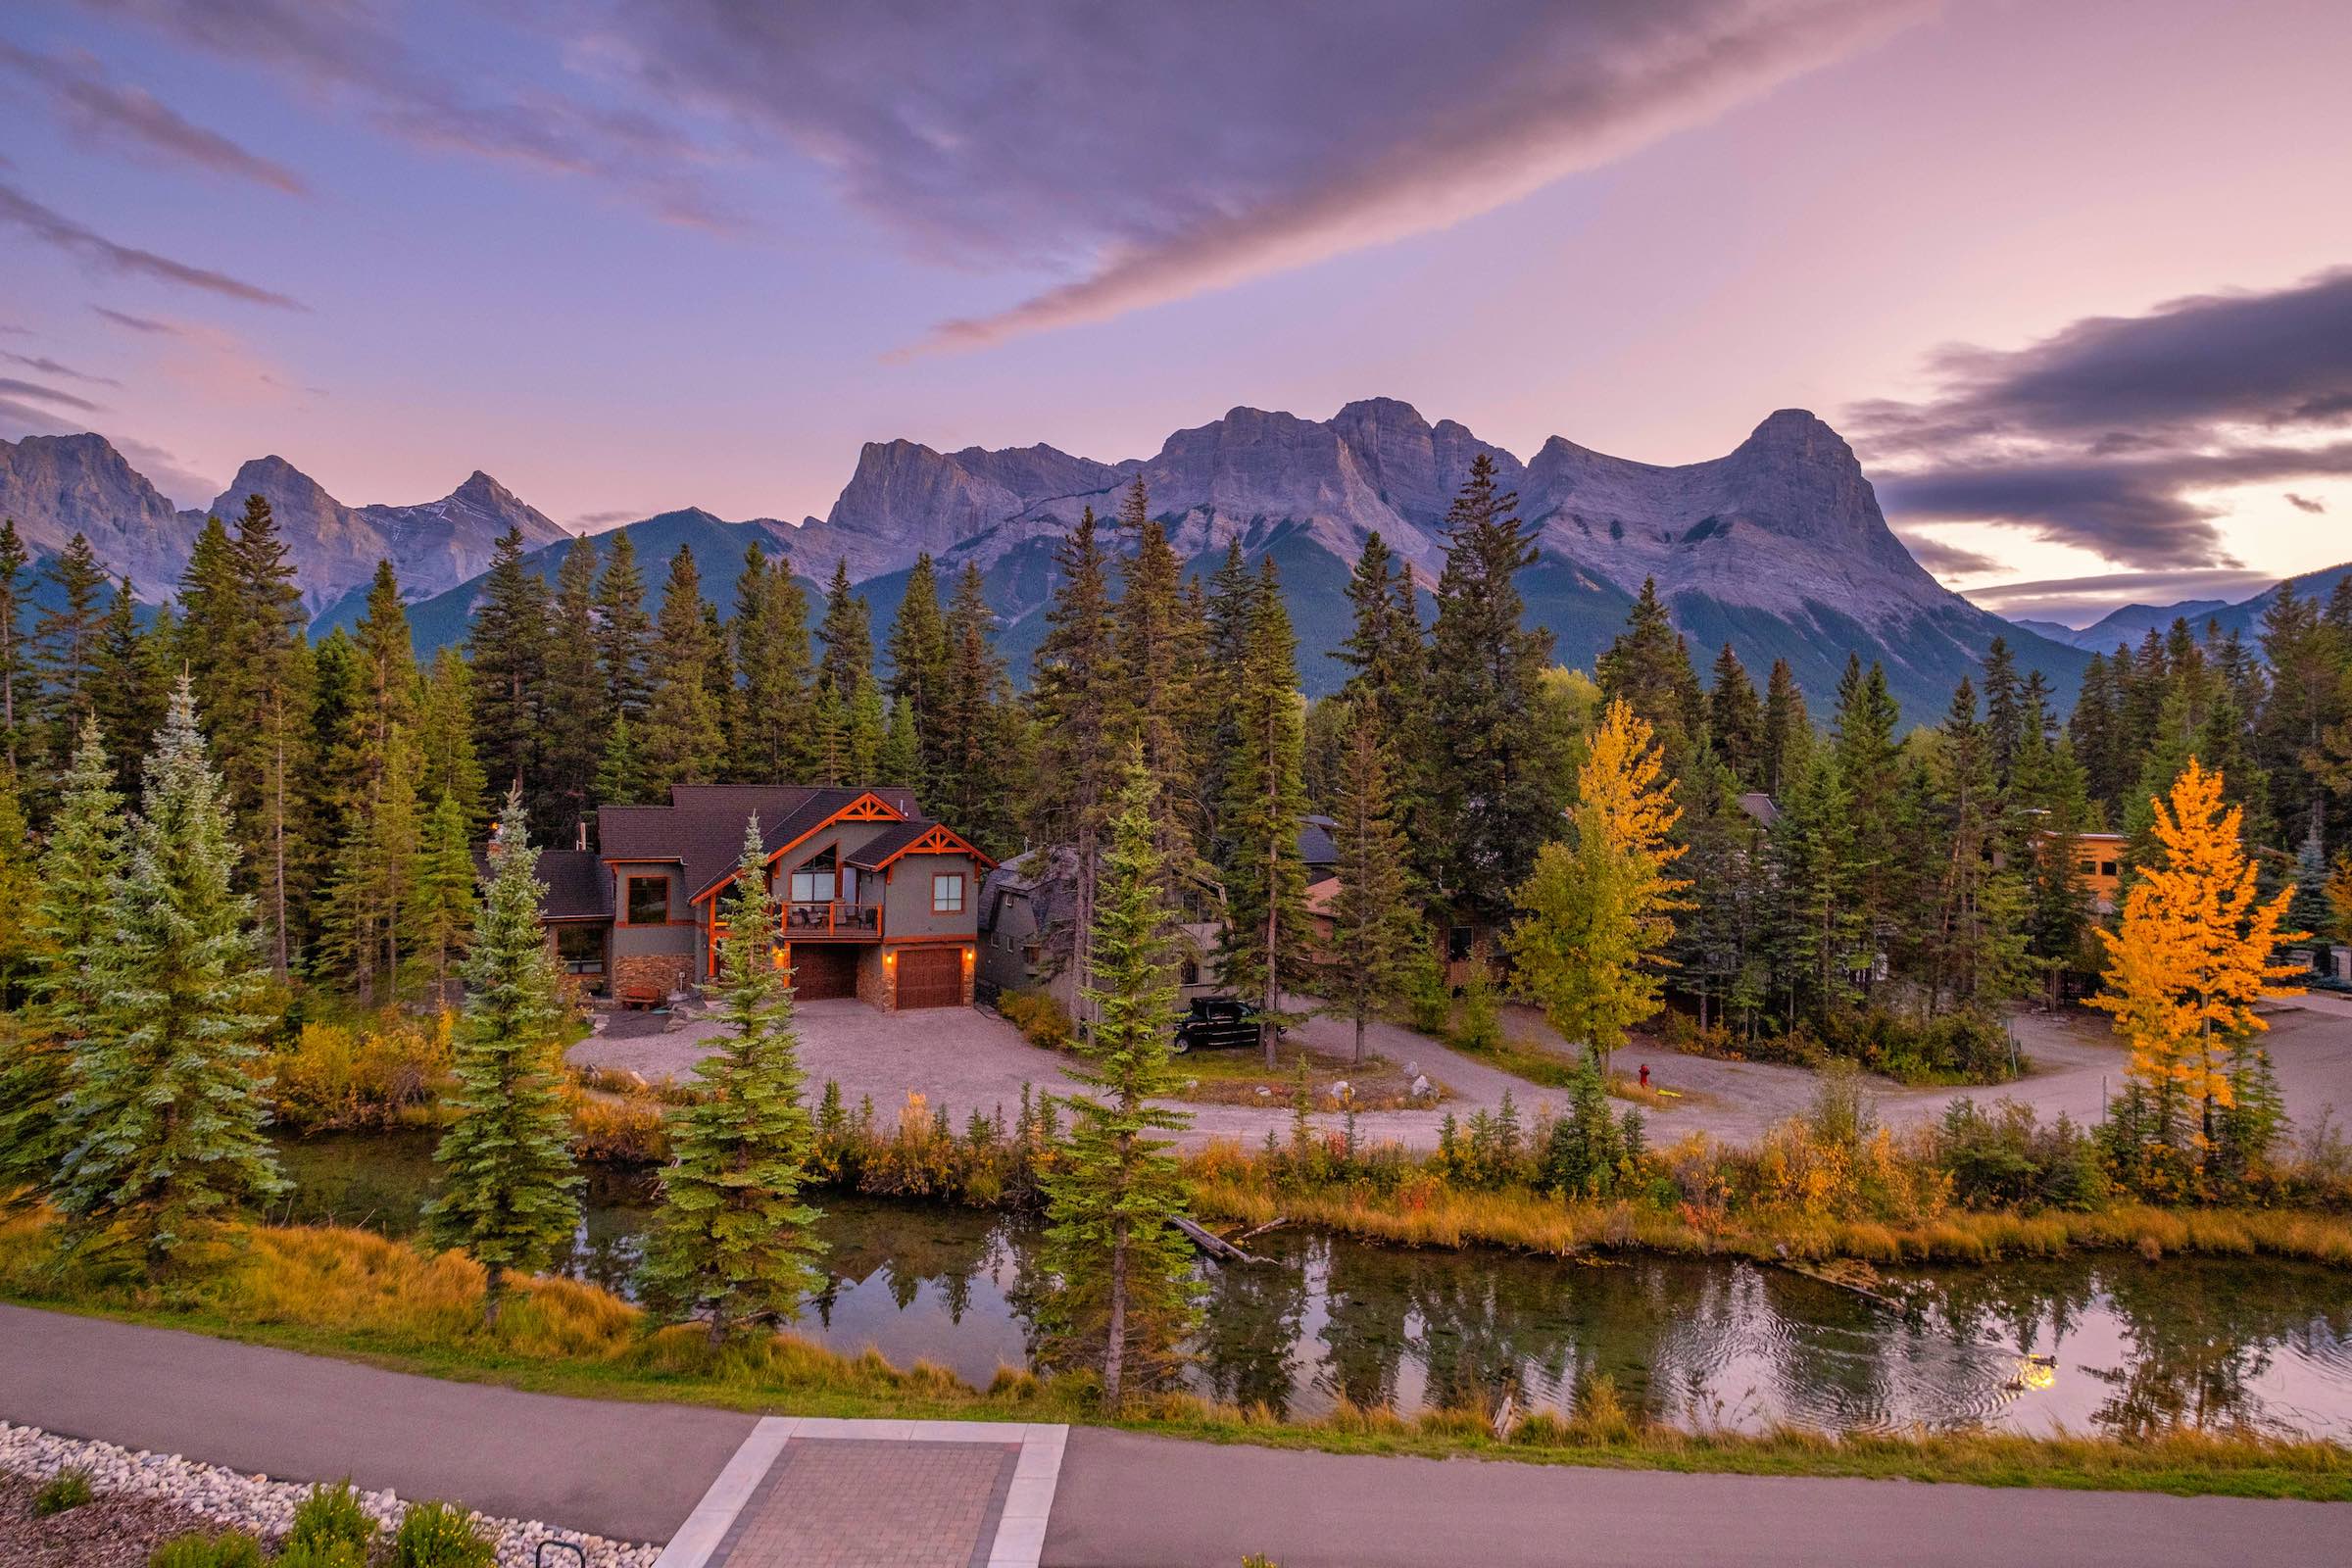  Malcolm Hotel canmore